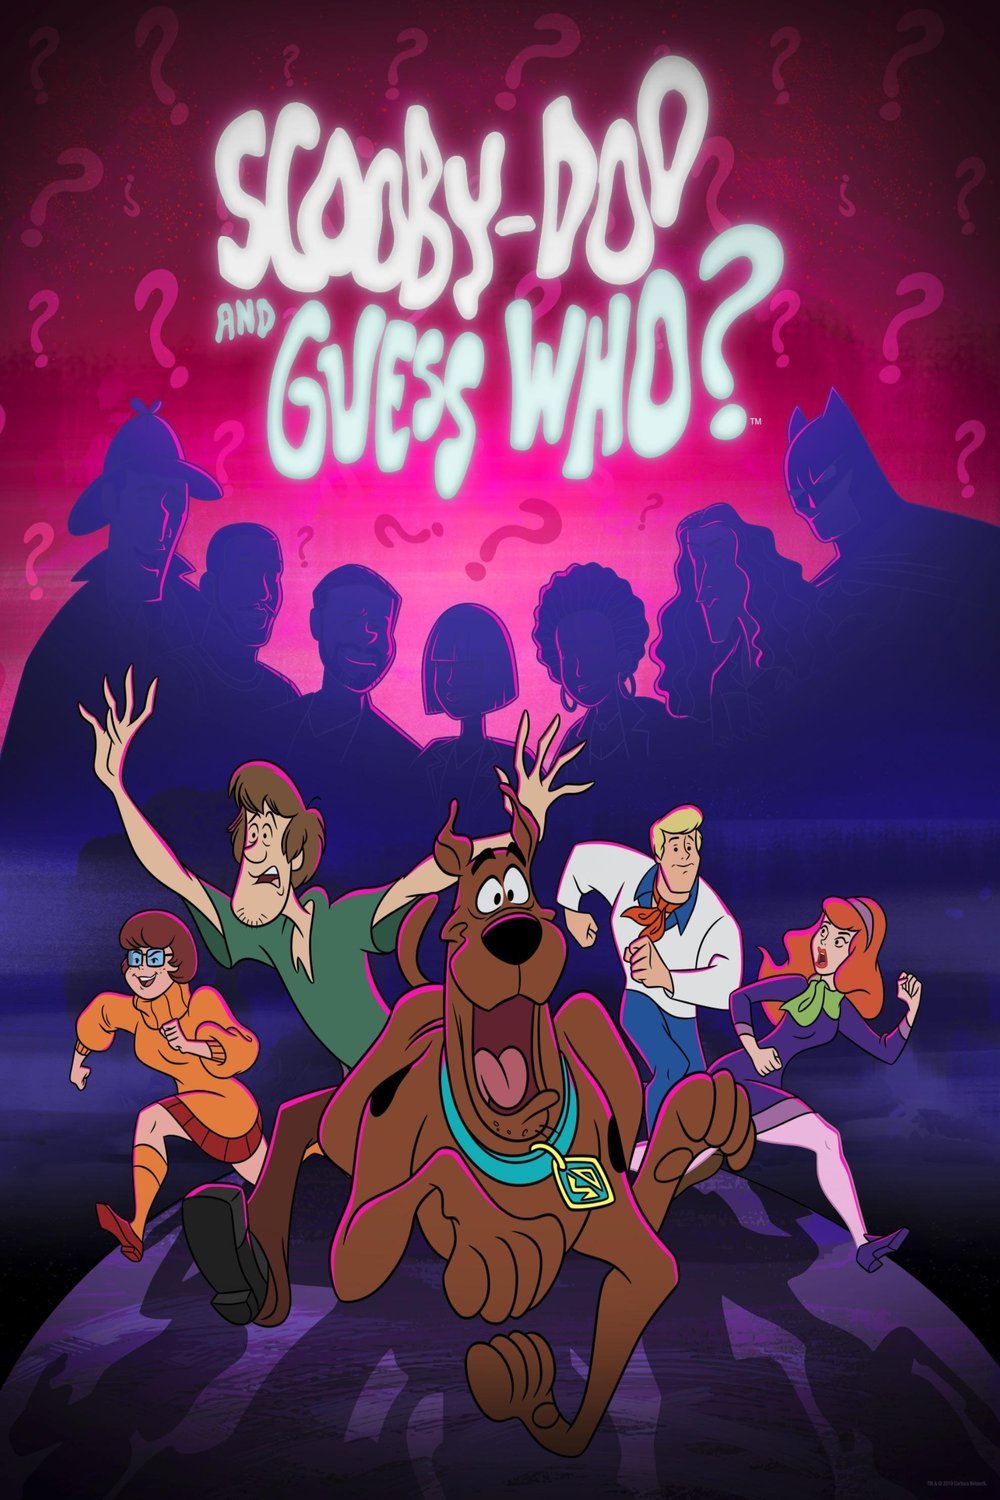 L'affiche du film Scooby-Doo and Guess Who?